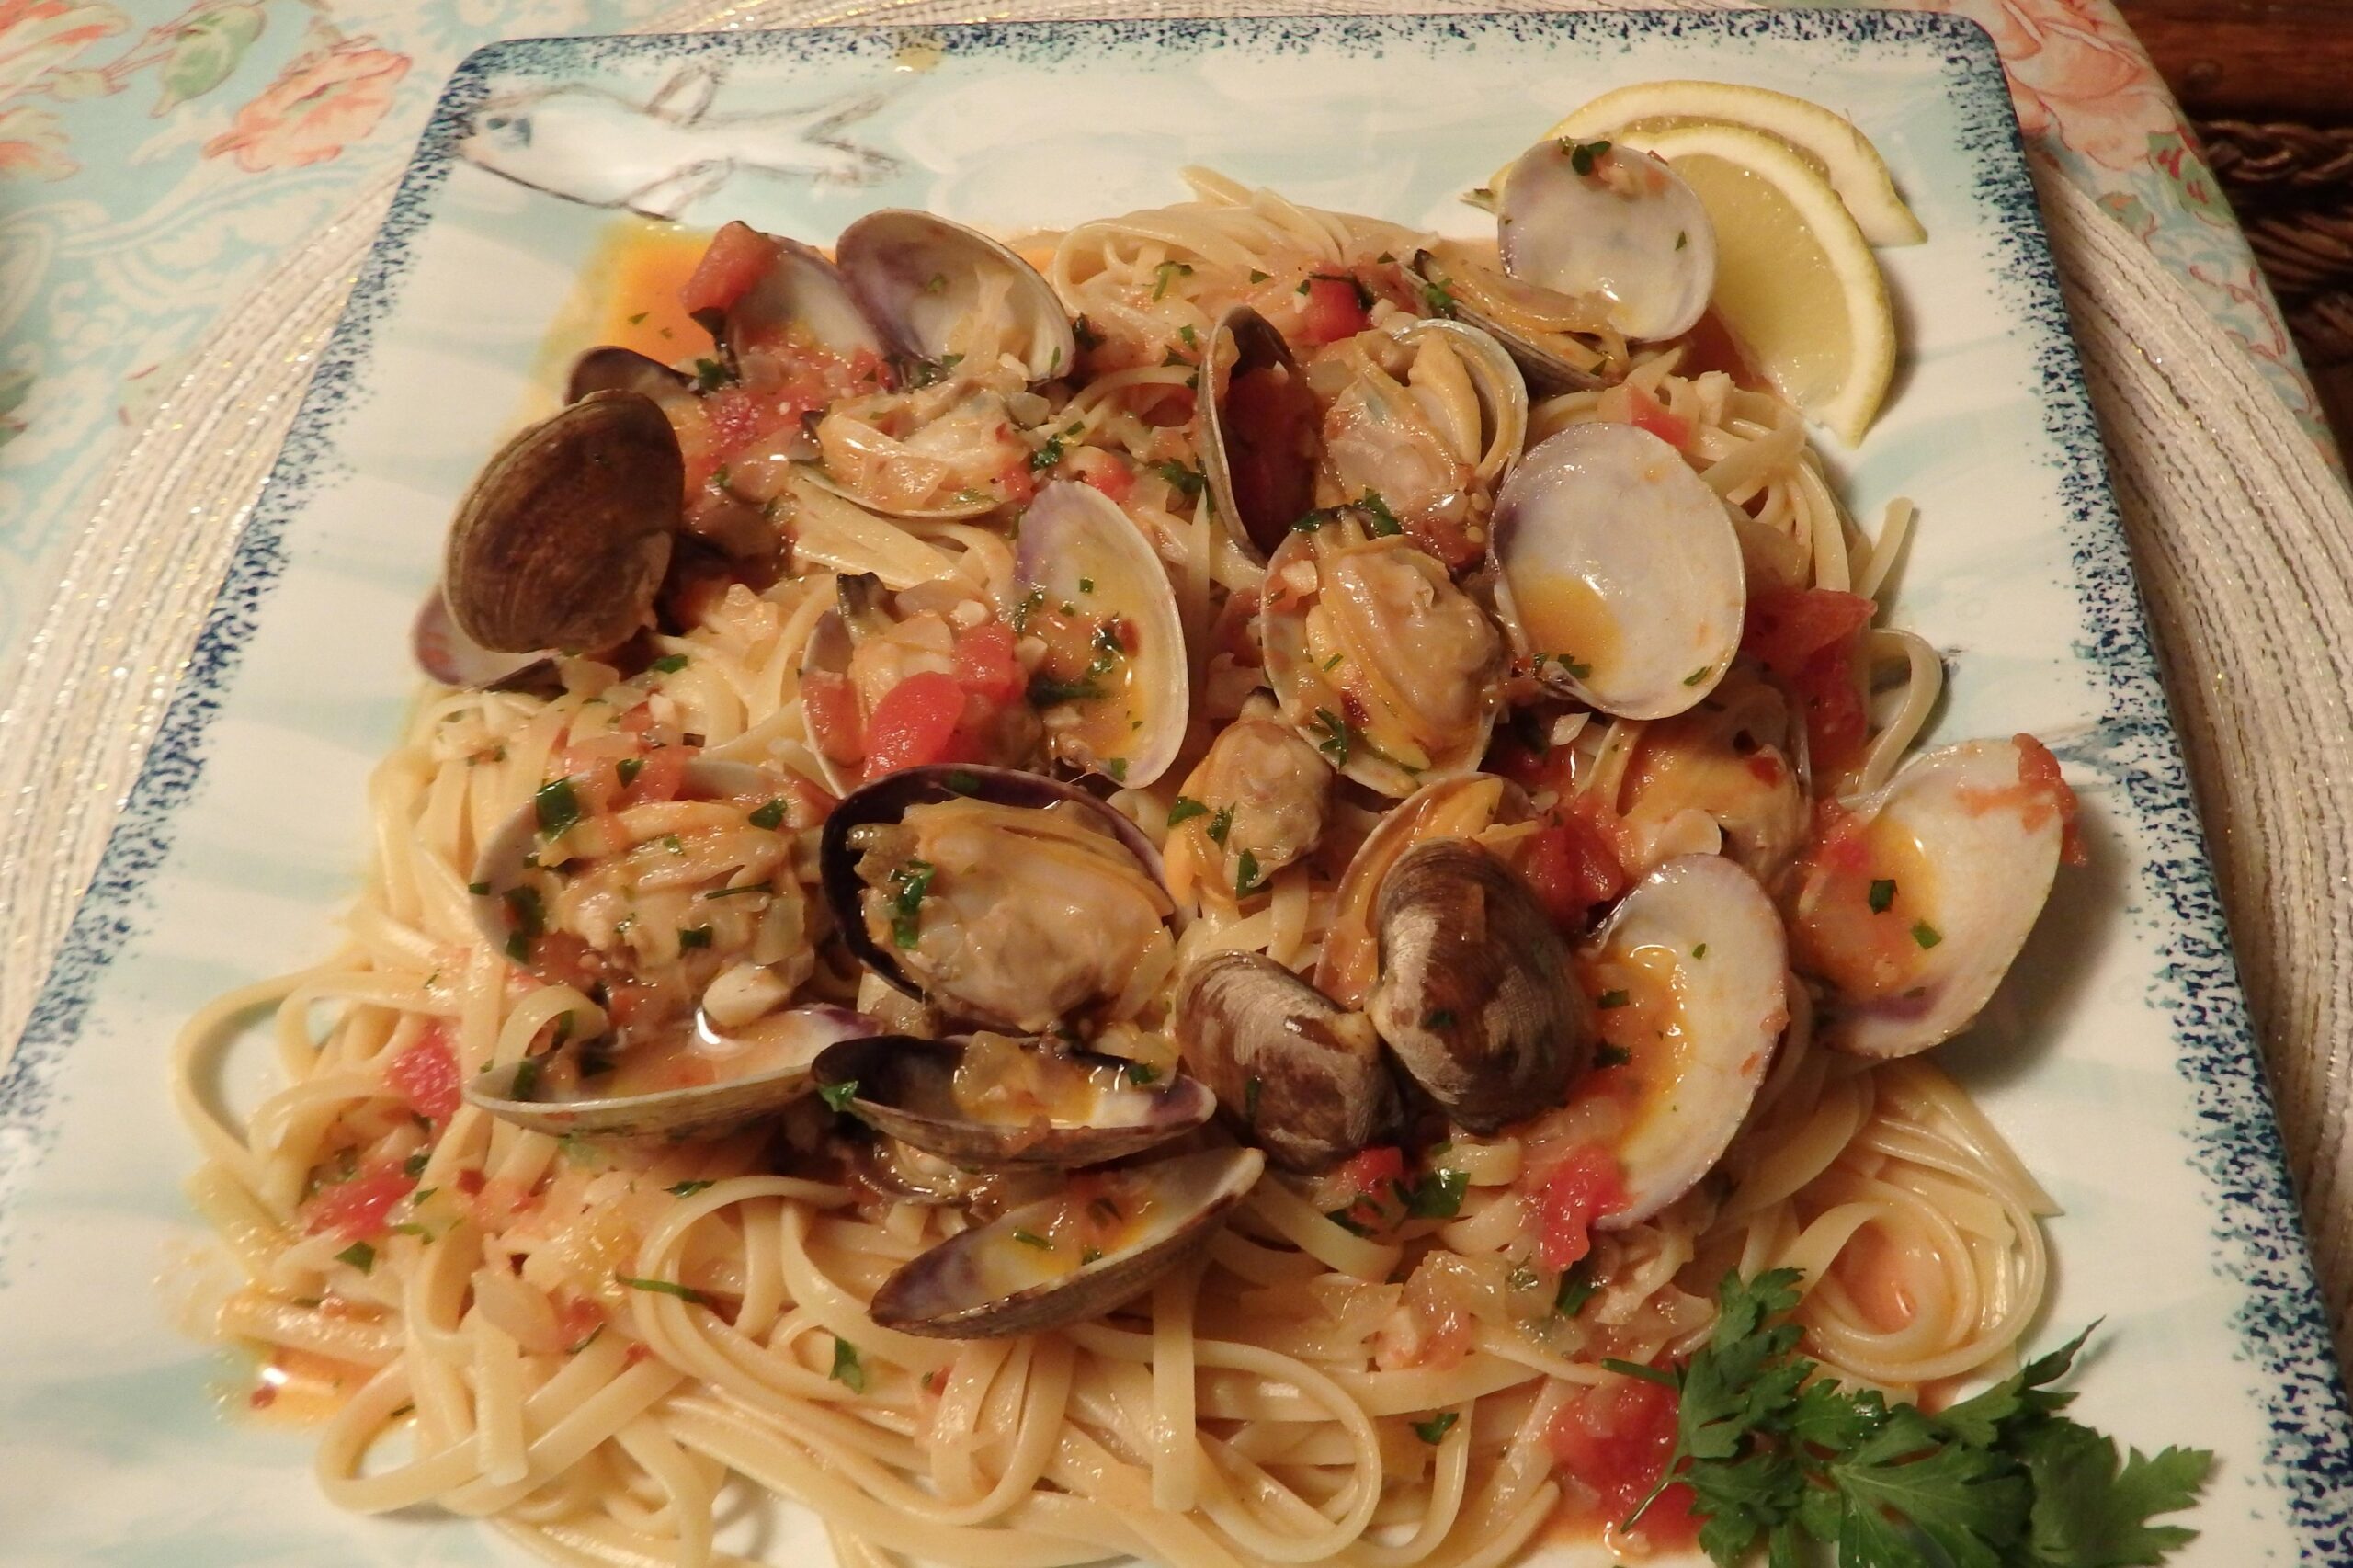  Dive into this delicious and savory Clam Pasta with Garlic & White Wine that will transport your taste buds to the seaside.